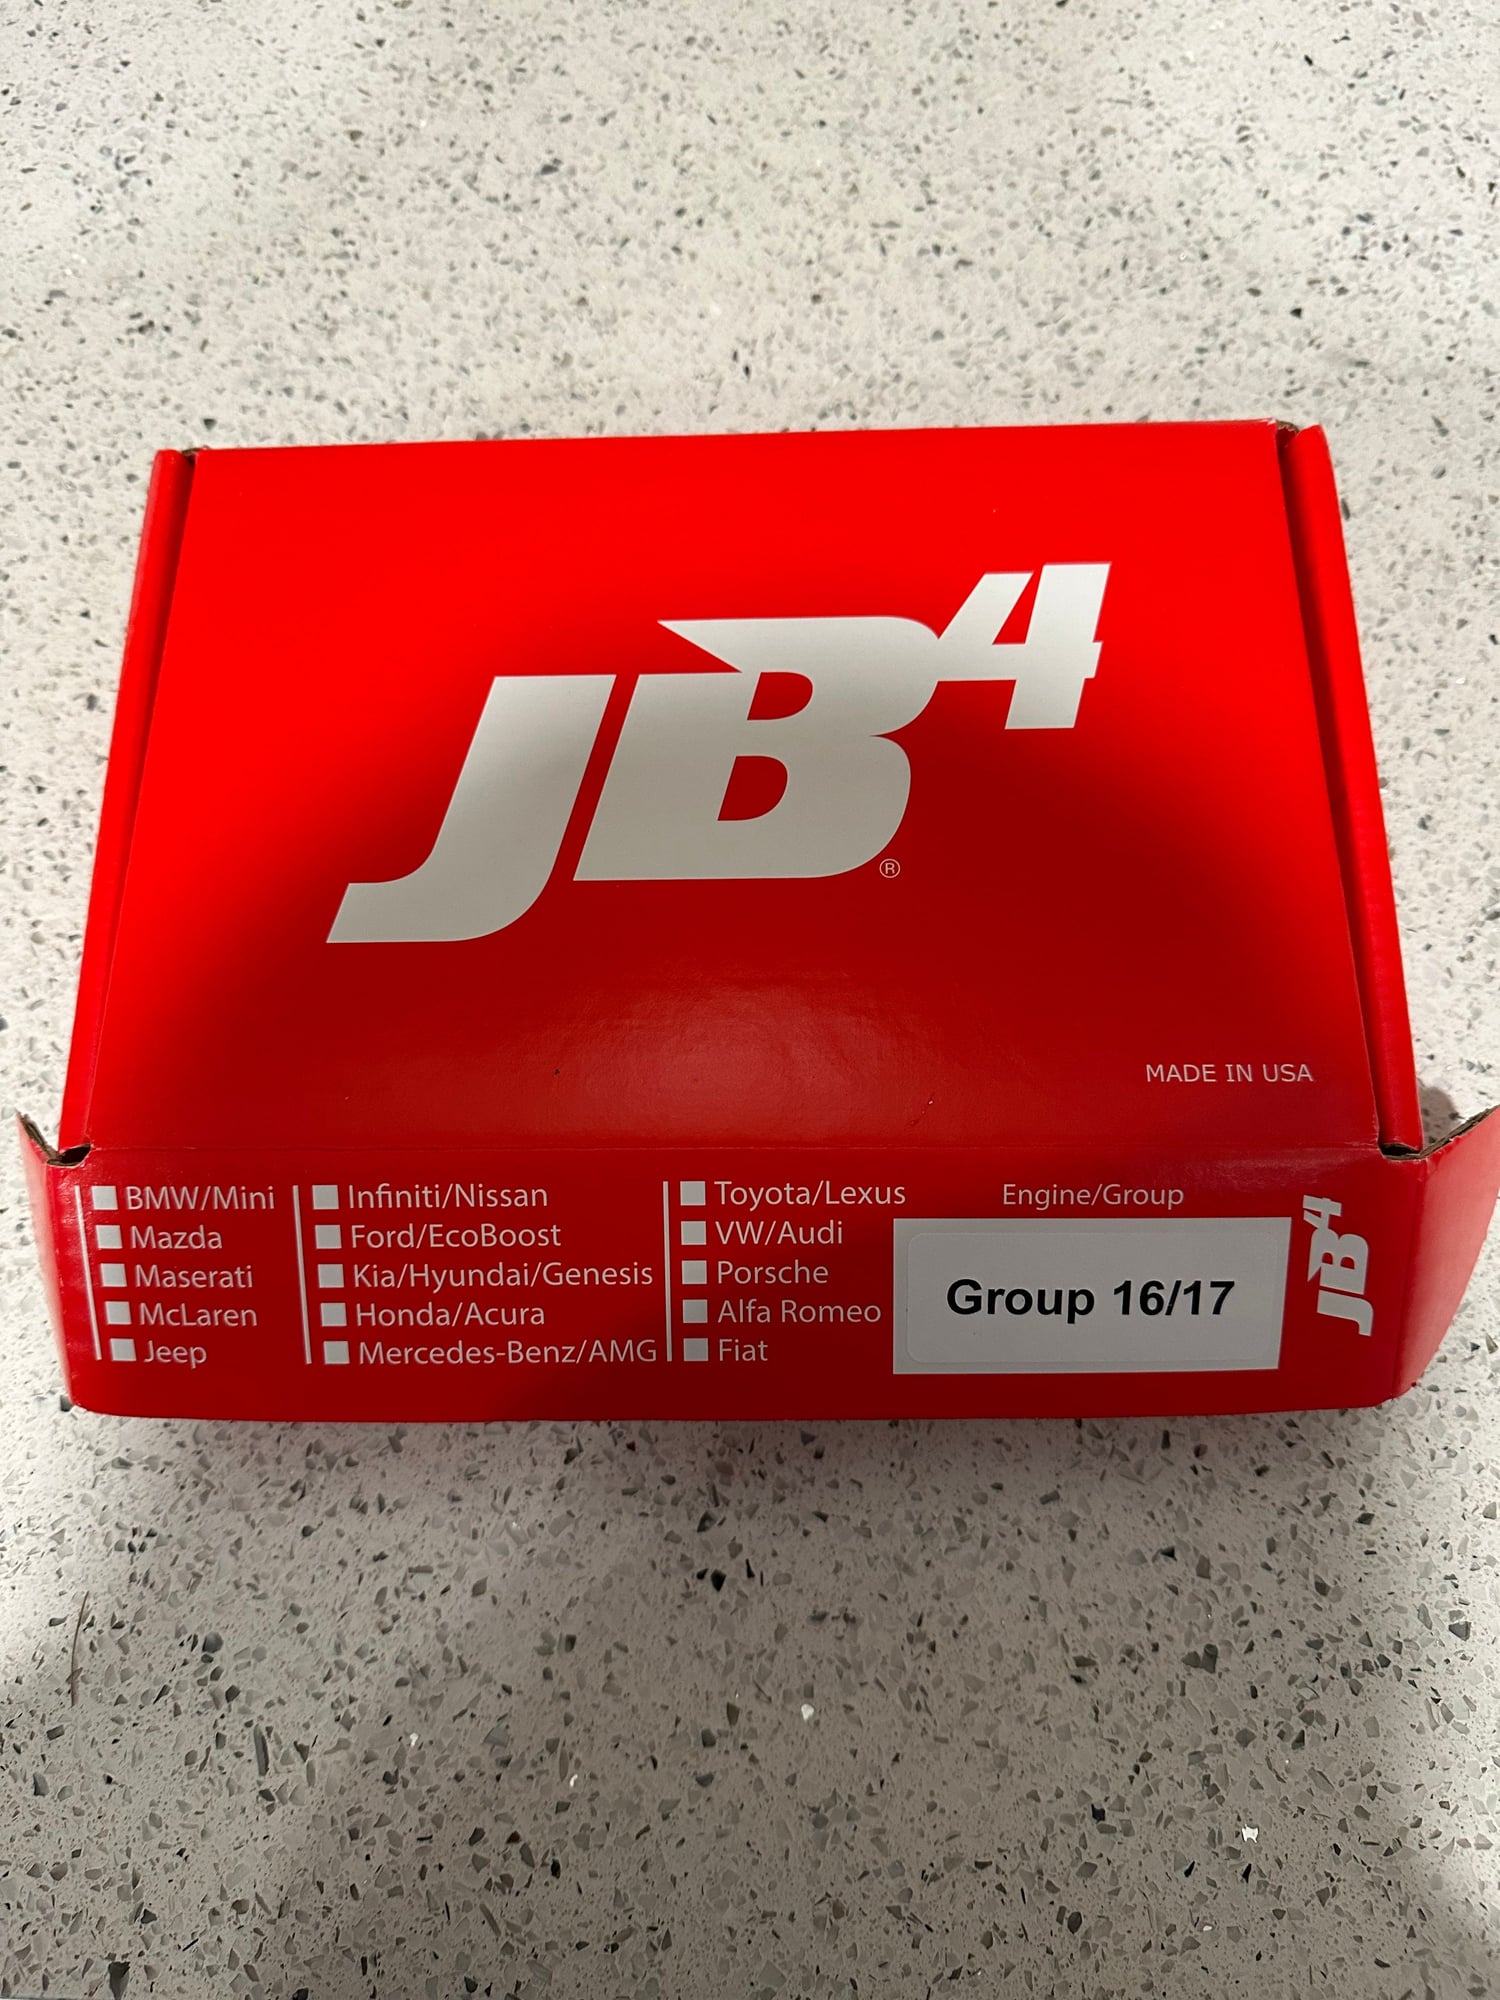 Engine - Power Adders - JB4 for A5 2.0 - Used - 2021 to 2025 Audi A5 - Bradenton, FL 34211, United States